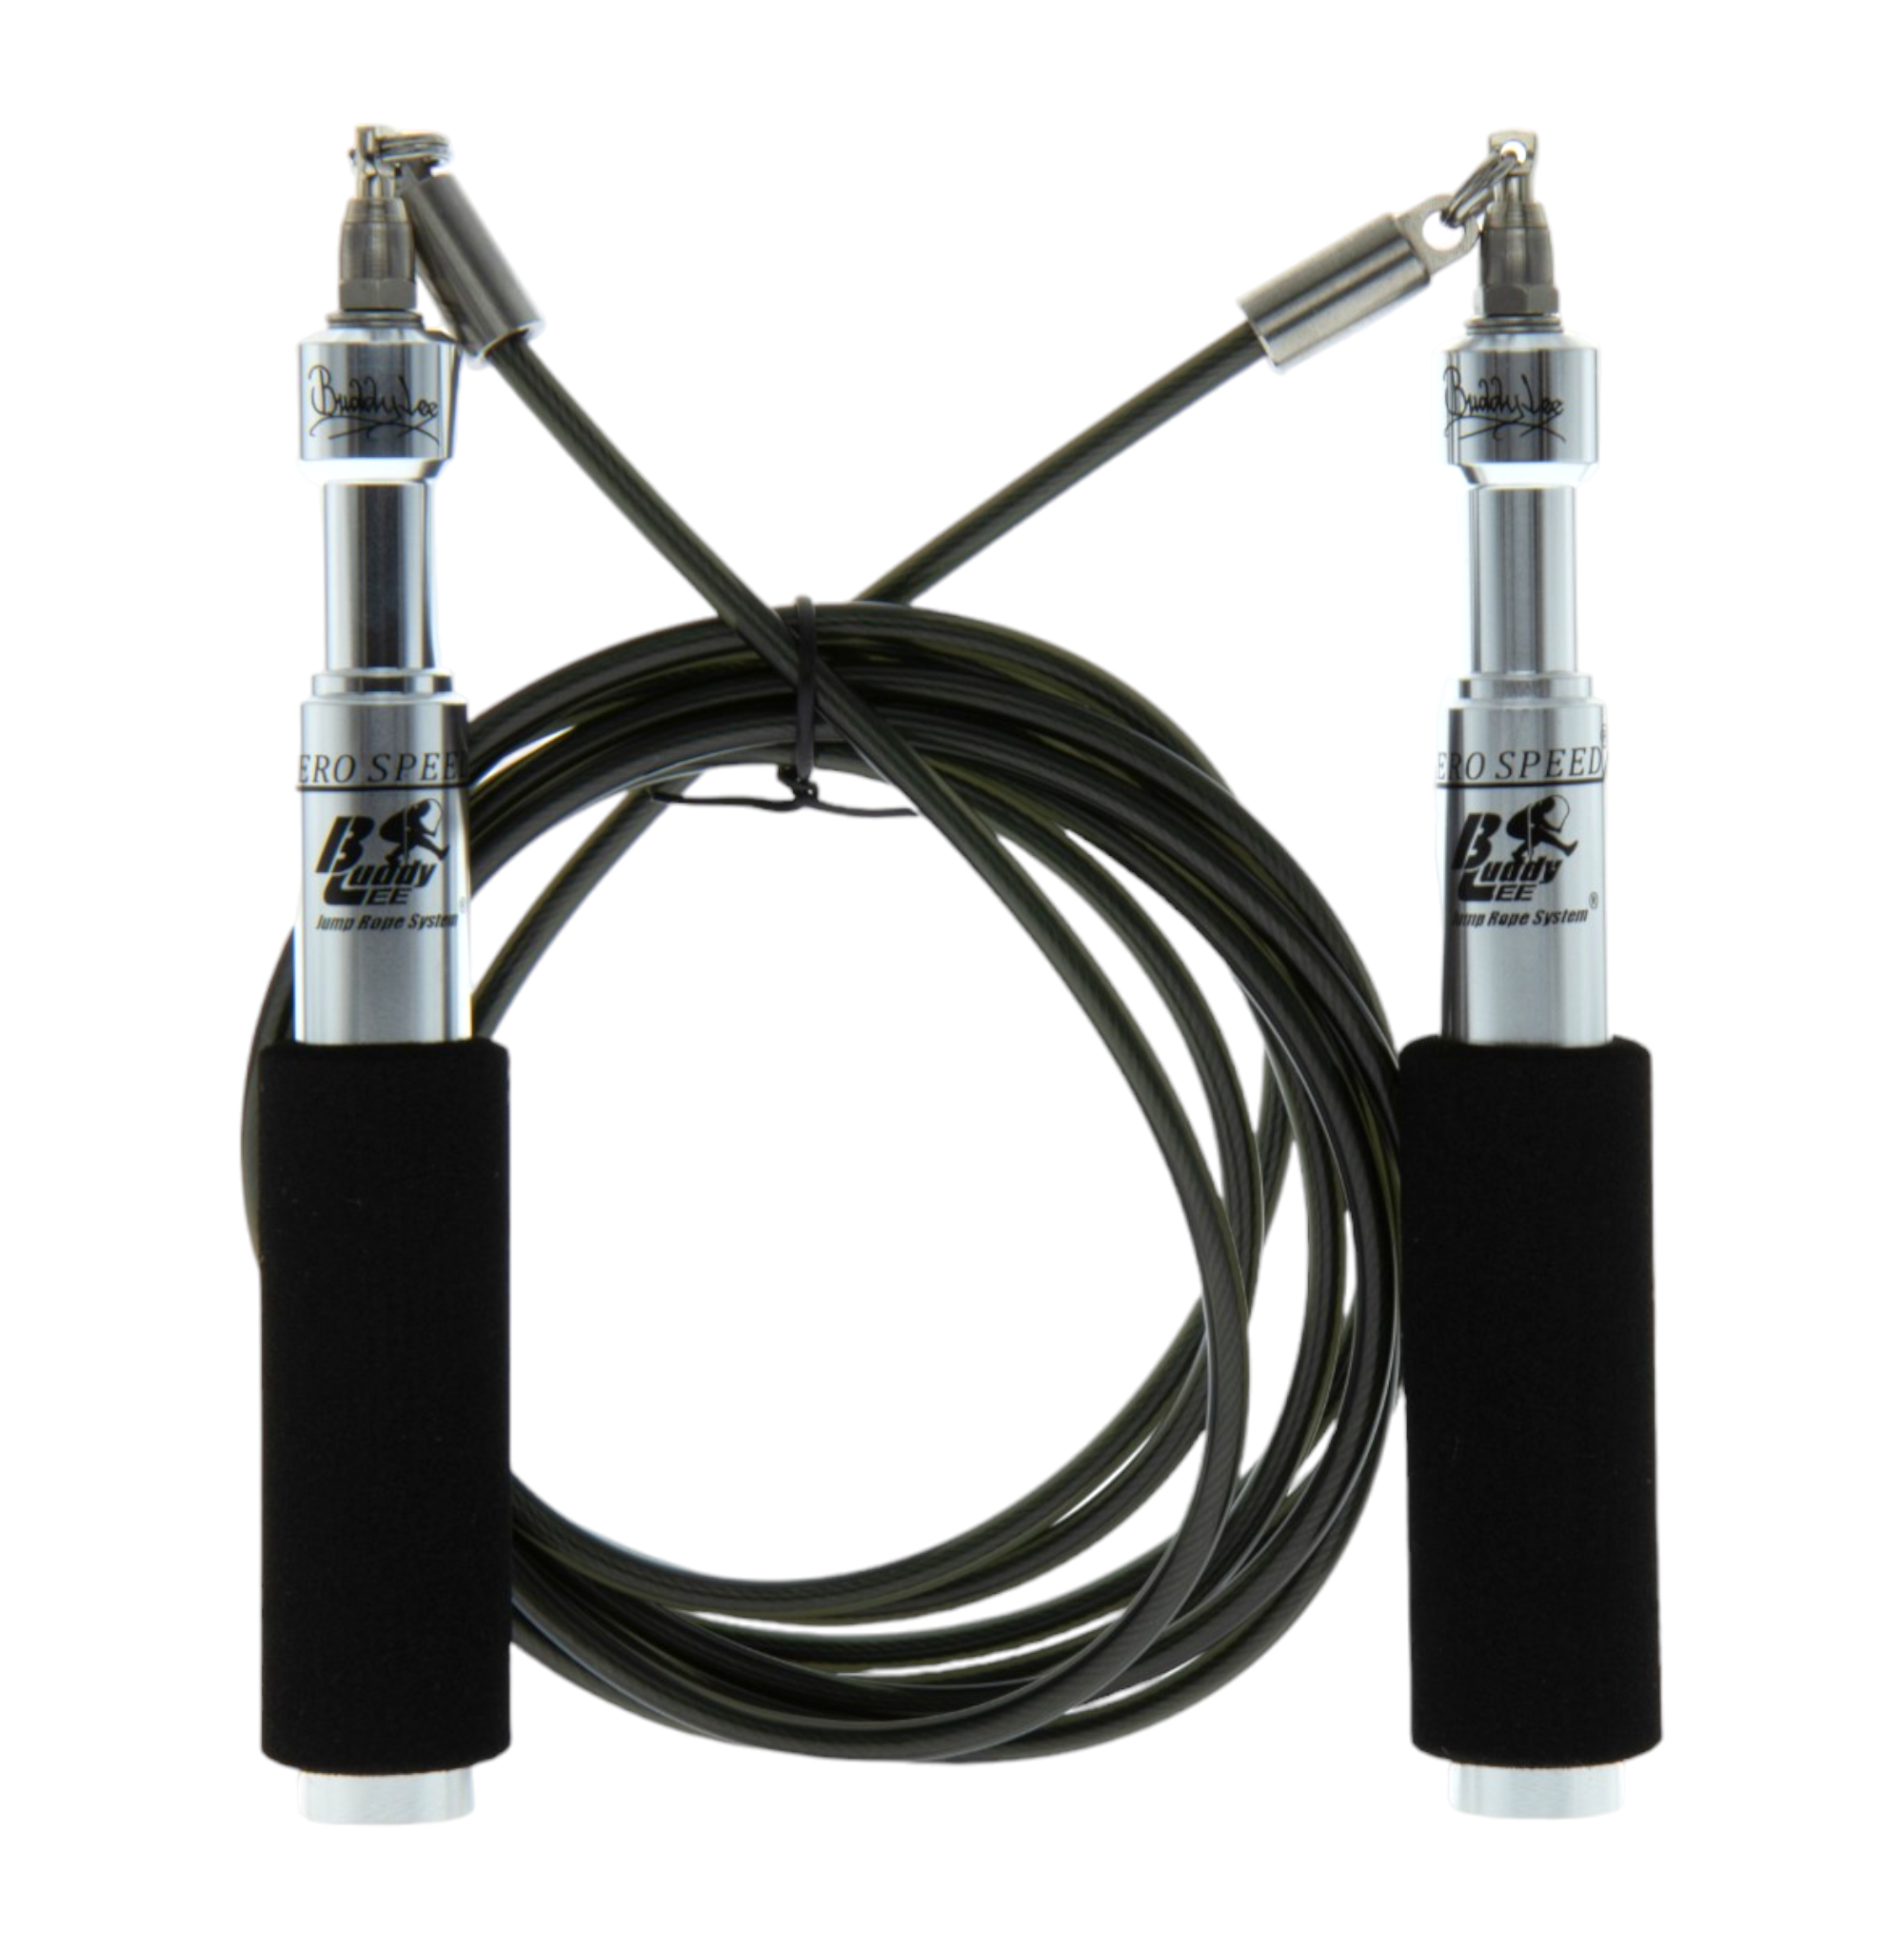 New Aero Speed Jump Rope - New Technology, Features, & Custom Colors Selection.